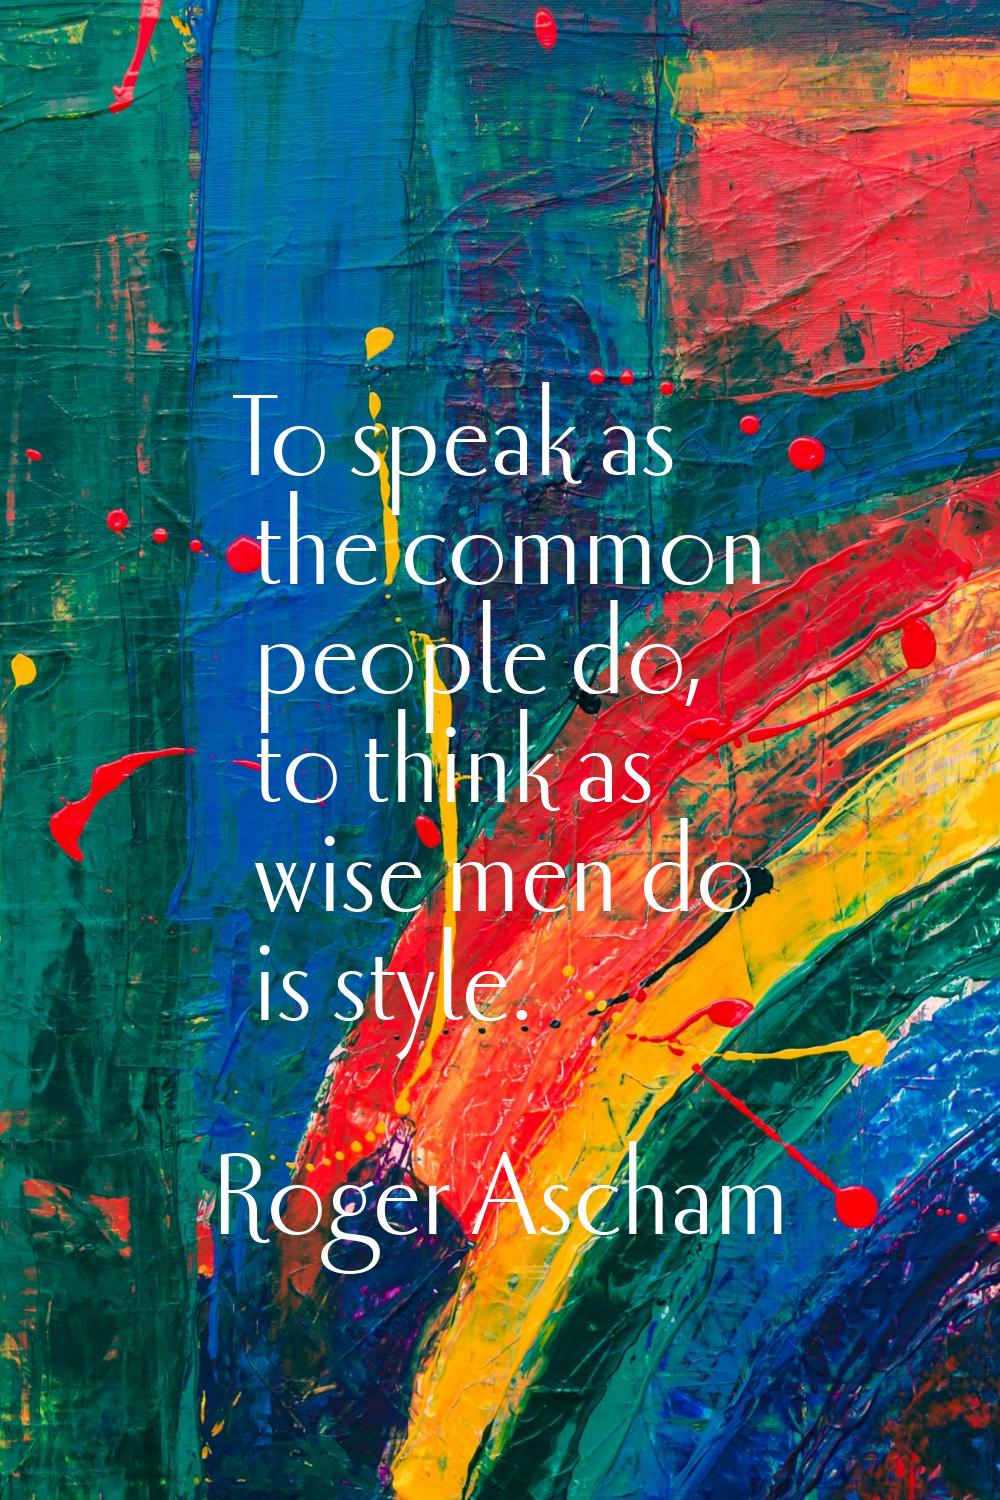 To speak as the common people do, to think as wise men do is style.